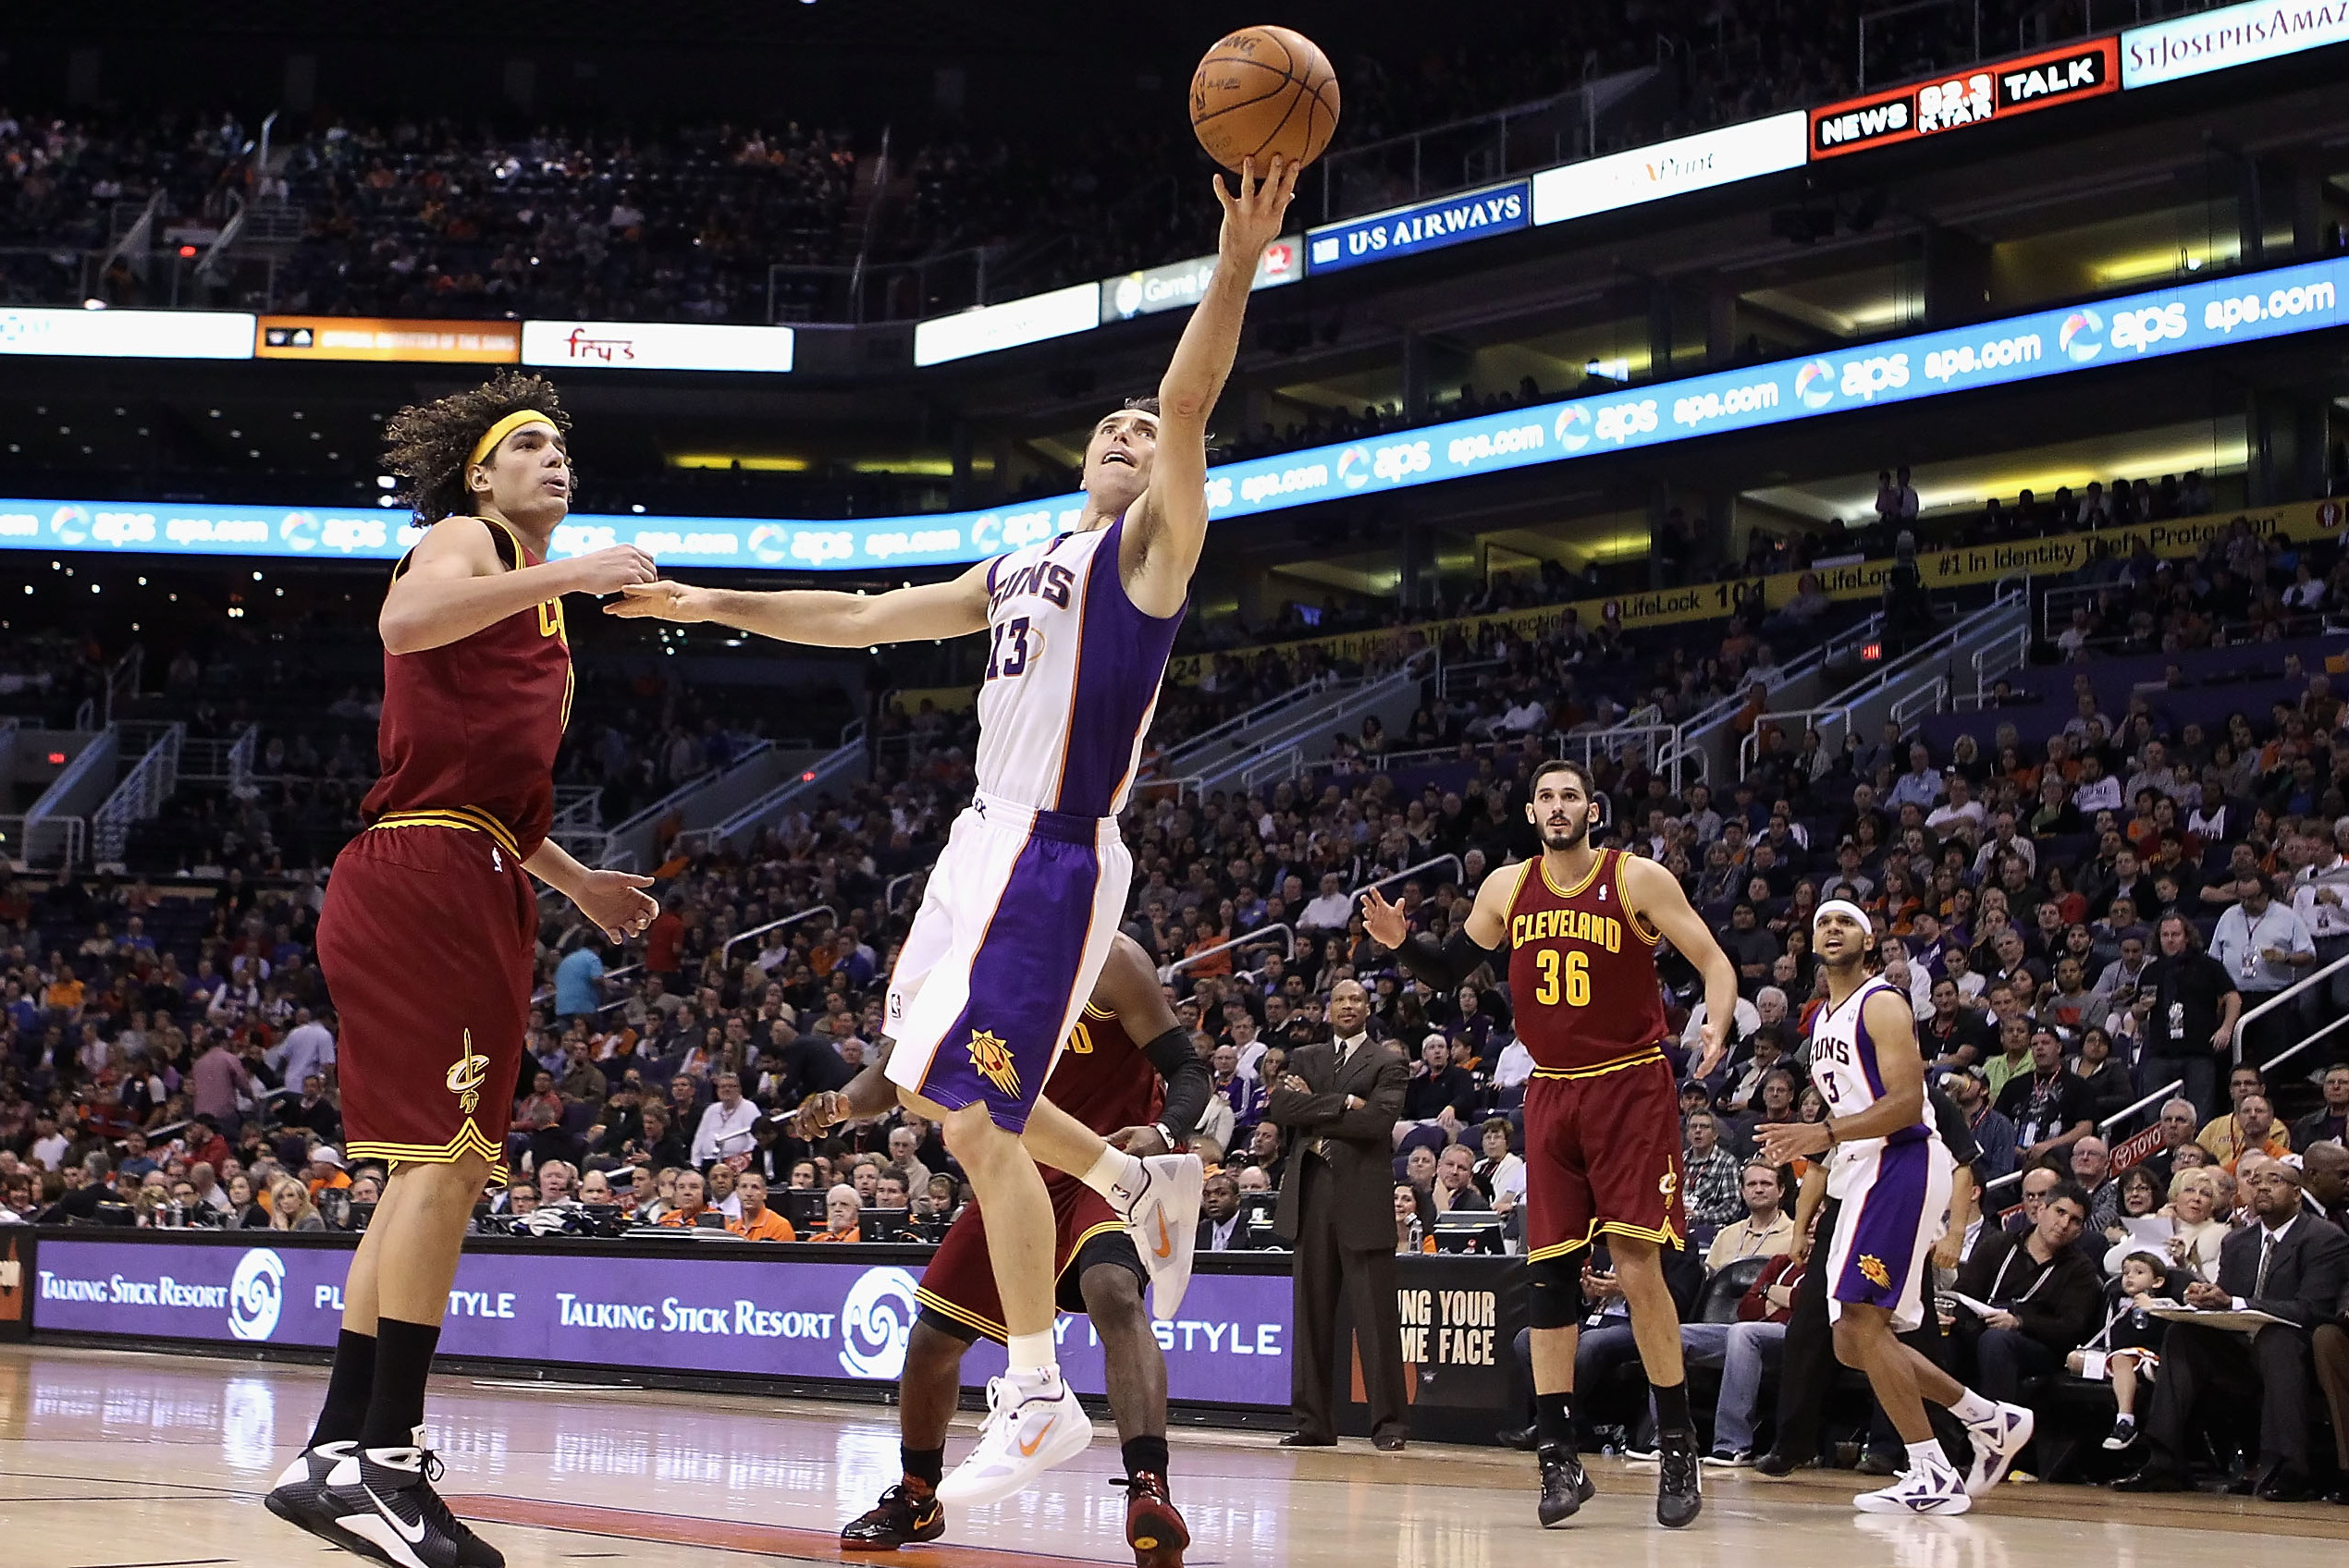 Crazy Stats - Steve Nash shot 50.4% from the field, 43.5% from 3